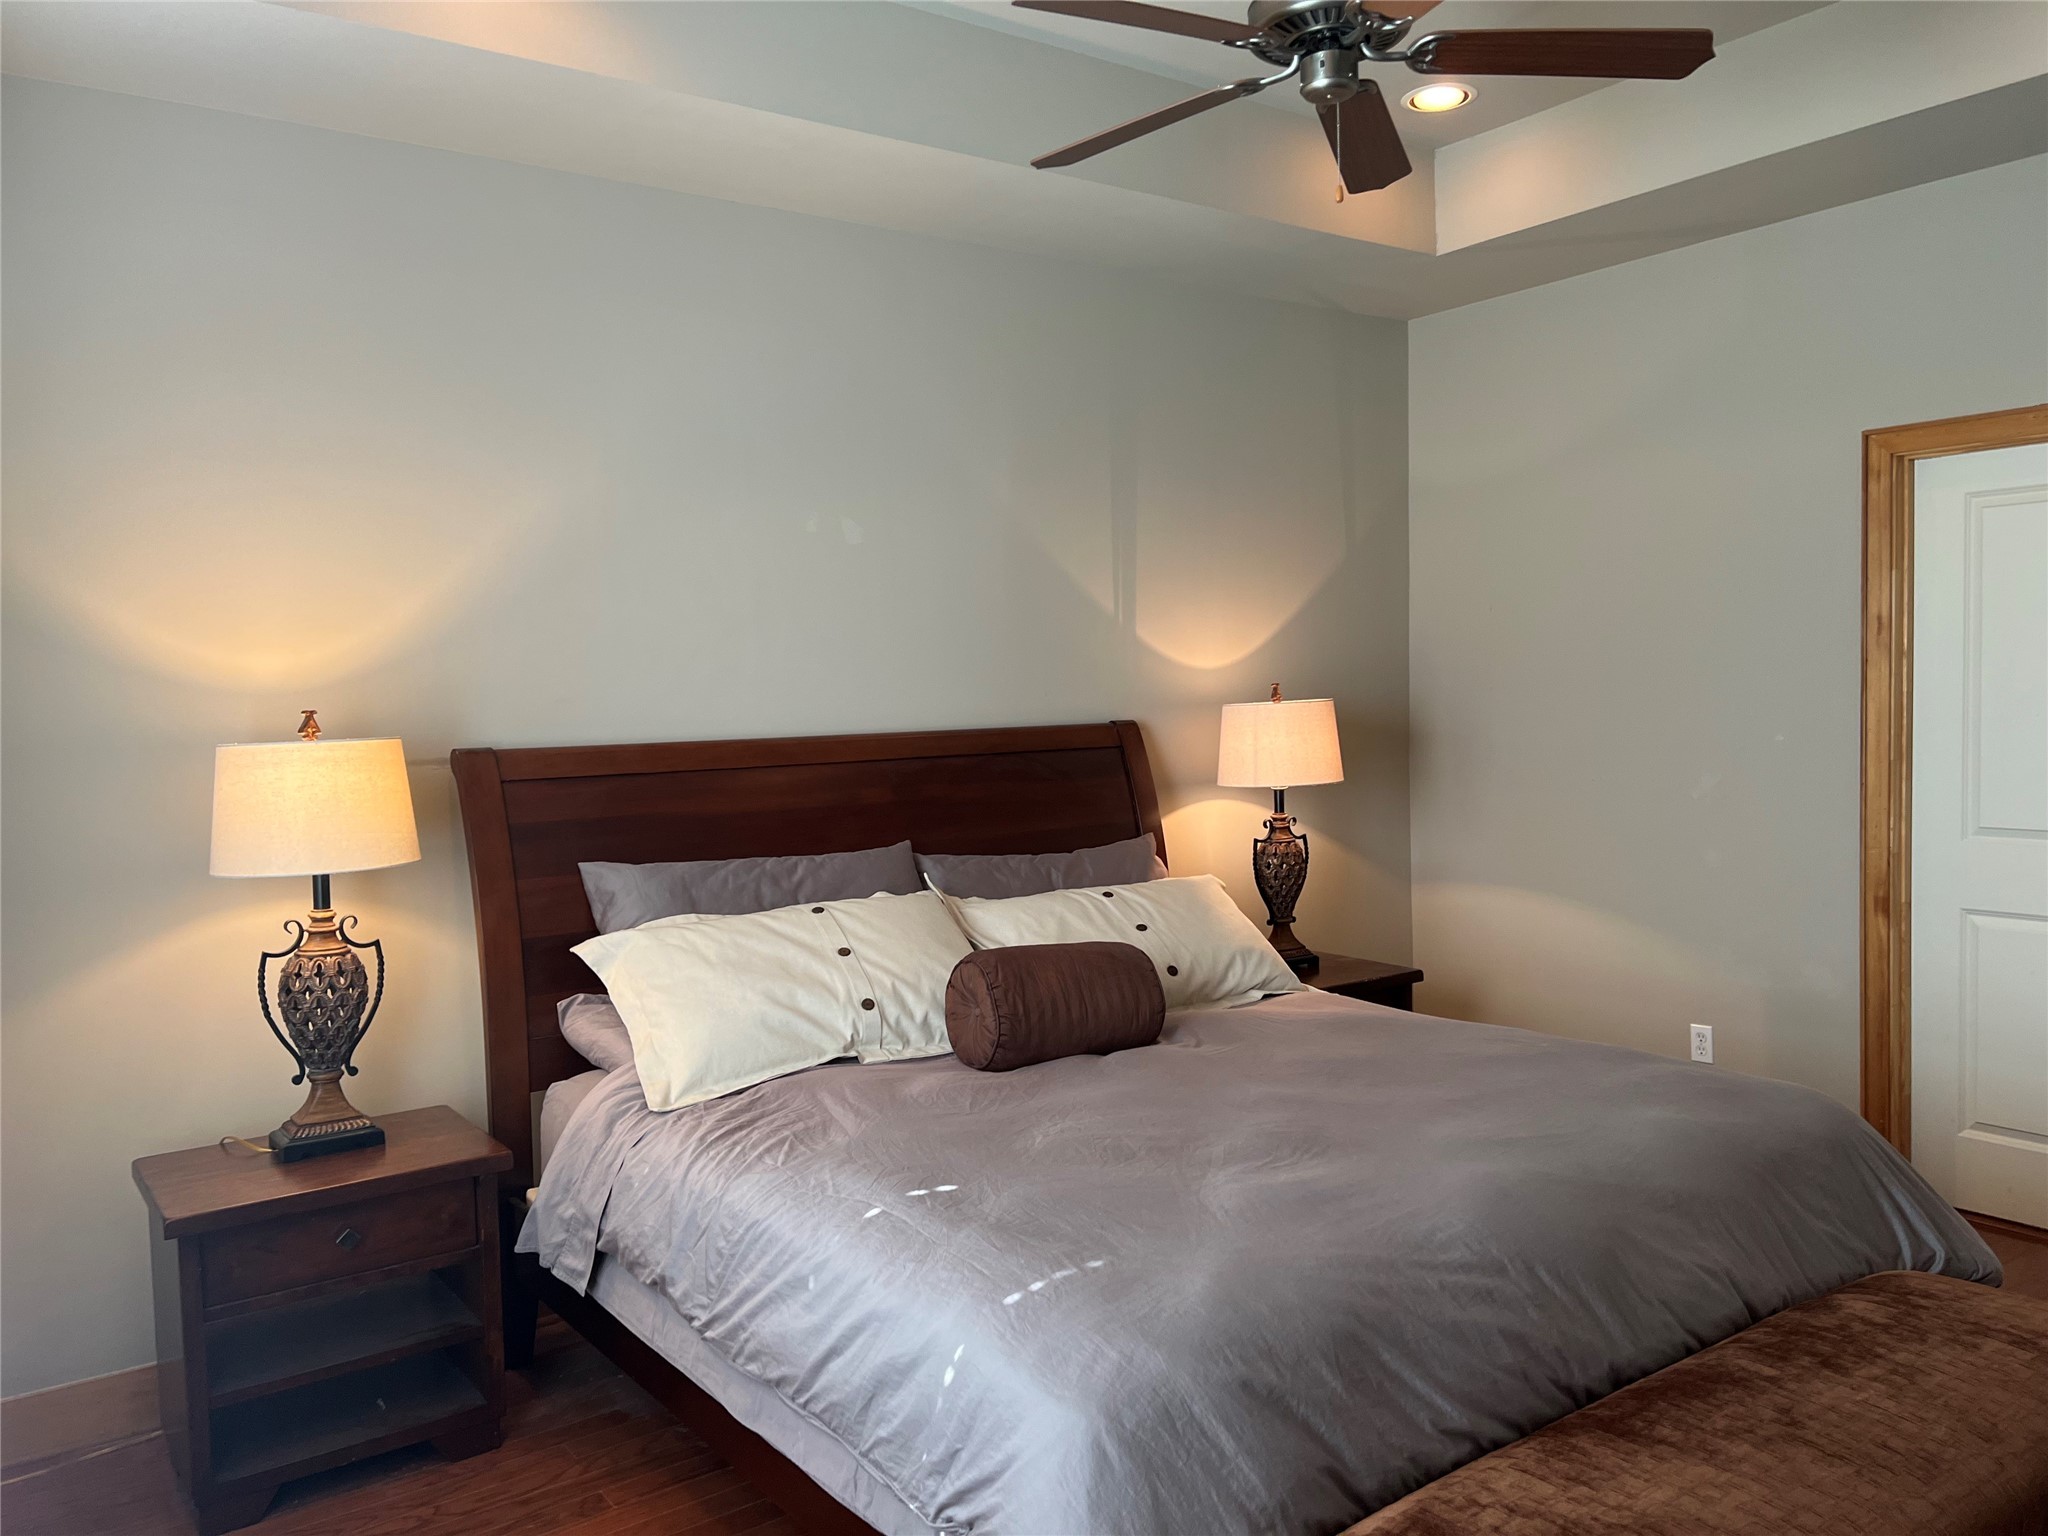 Primary oversized bedroom suite with coffered ceiling, recessed lighting with dimmer, sitting area and hardwood floors.